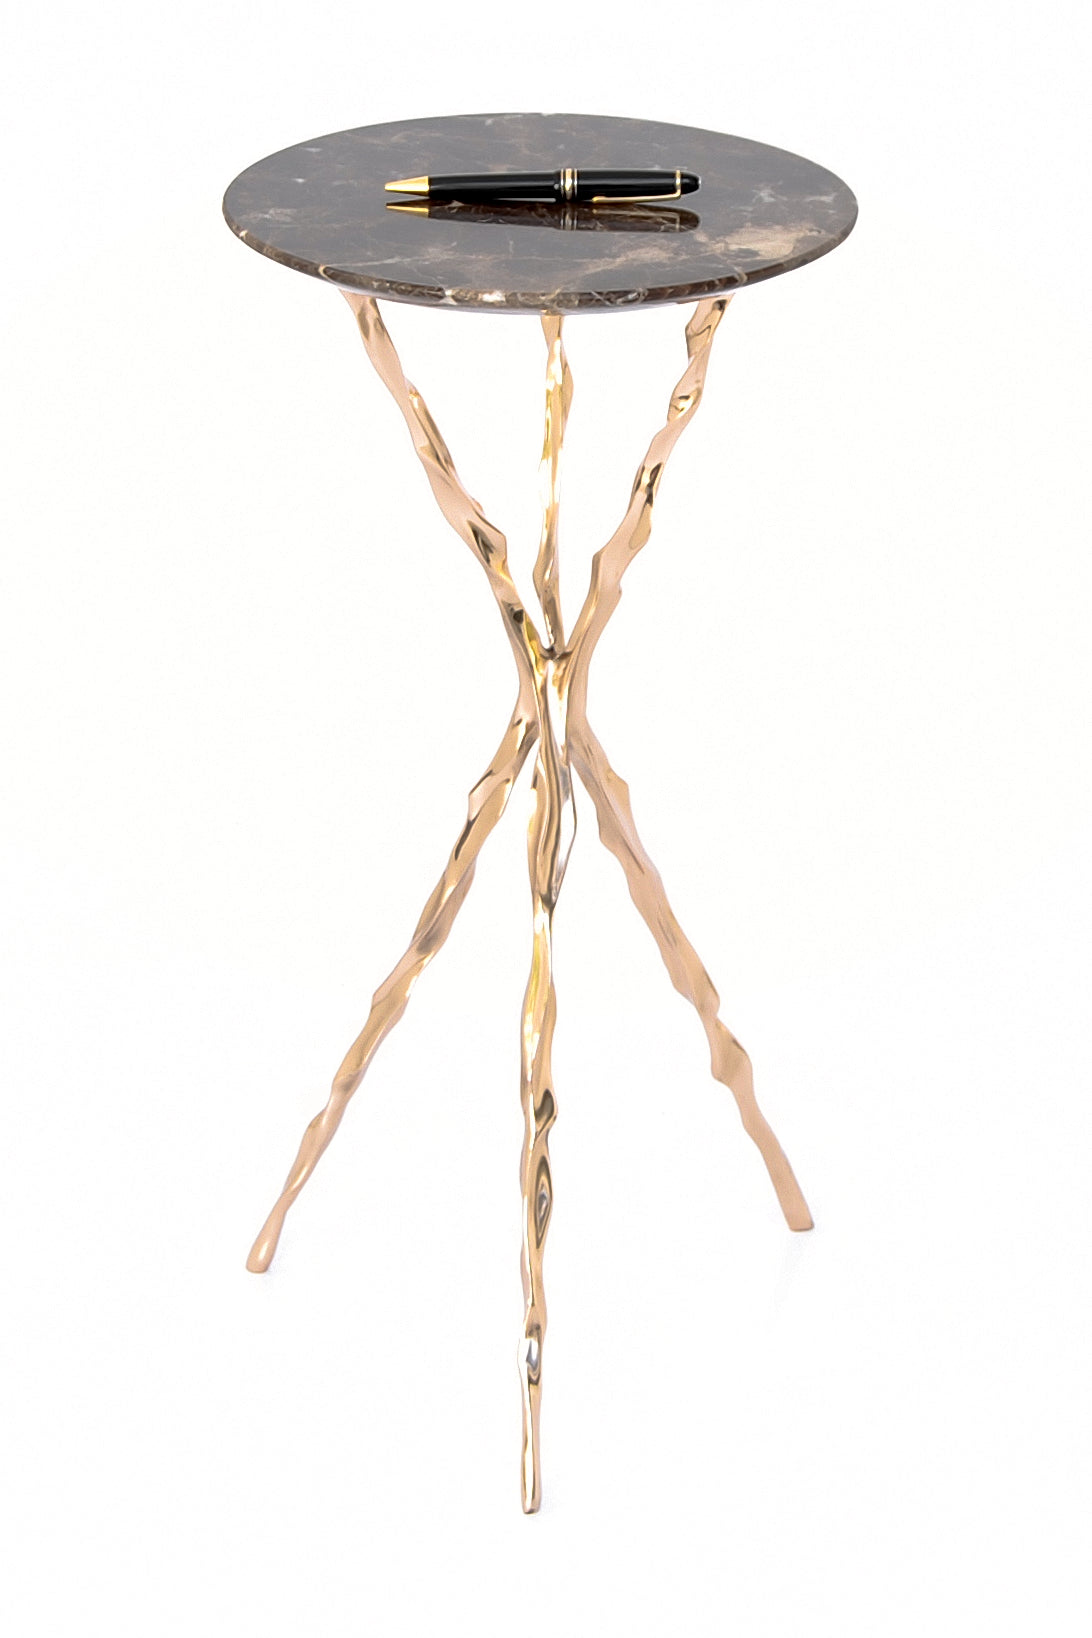 THOM DRINK TABLE<br><br>MARRON IMPERIAL MARBLE<br>POLISHED BRONZE